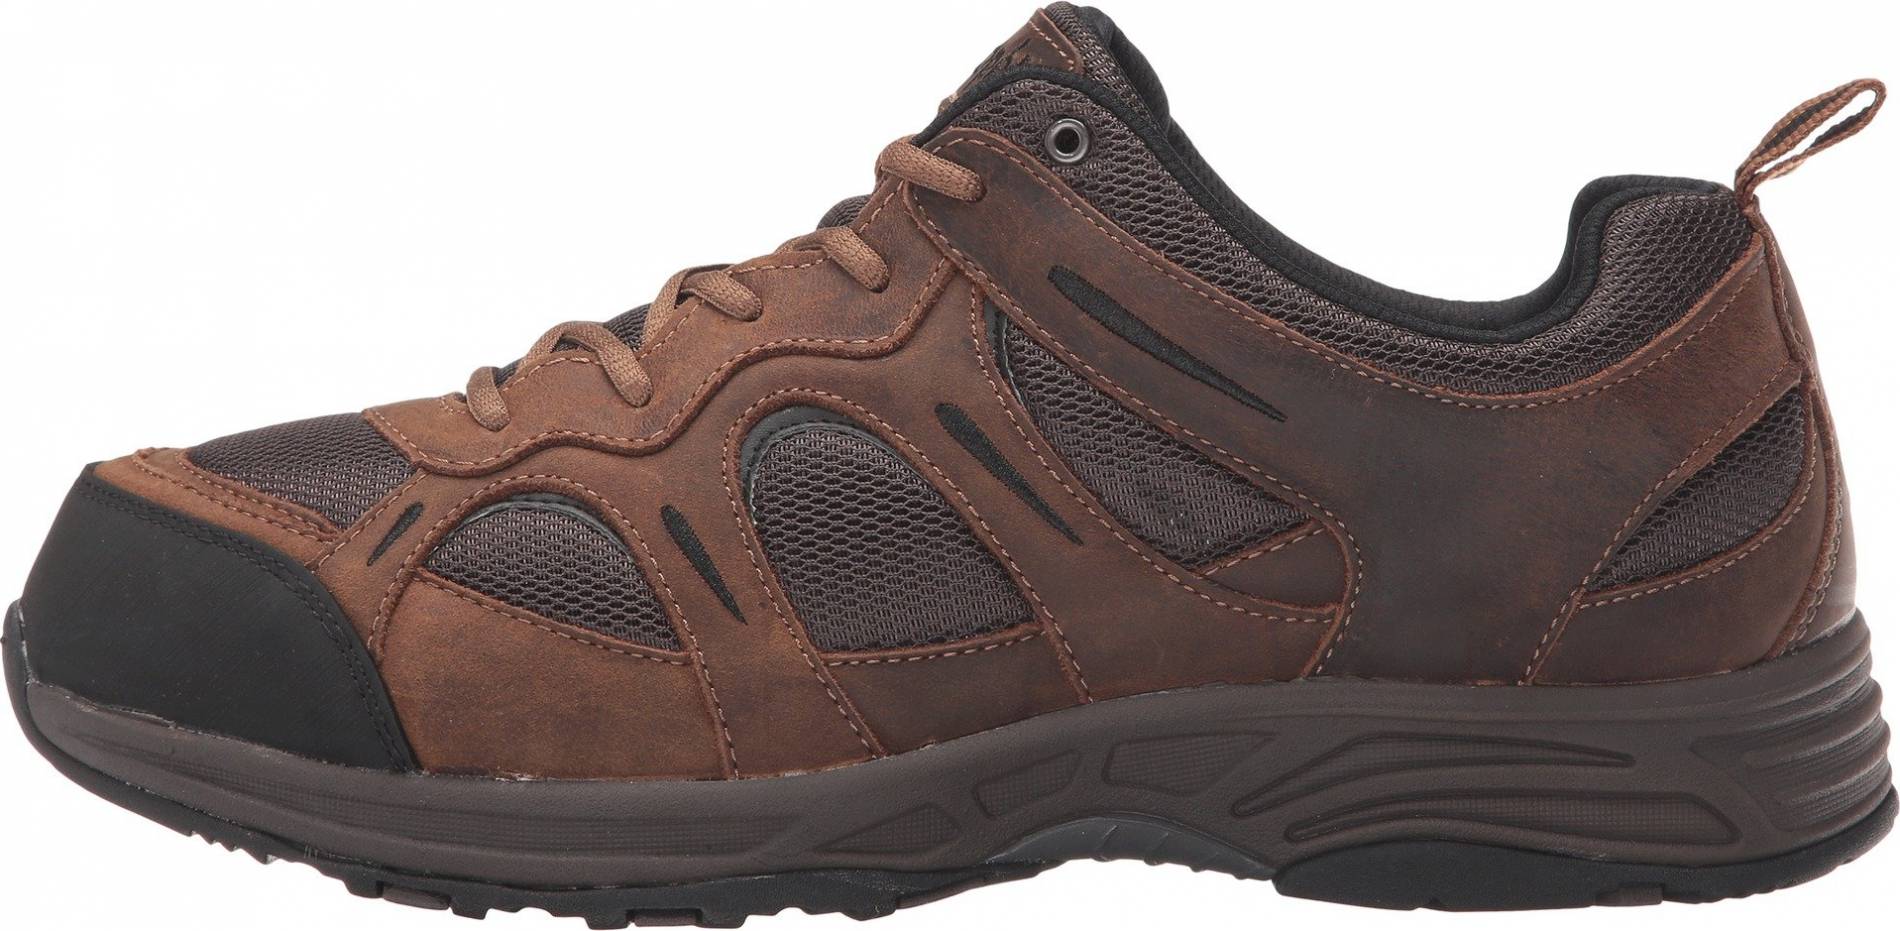 Save 60% on Propet Walking Shoes (15 